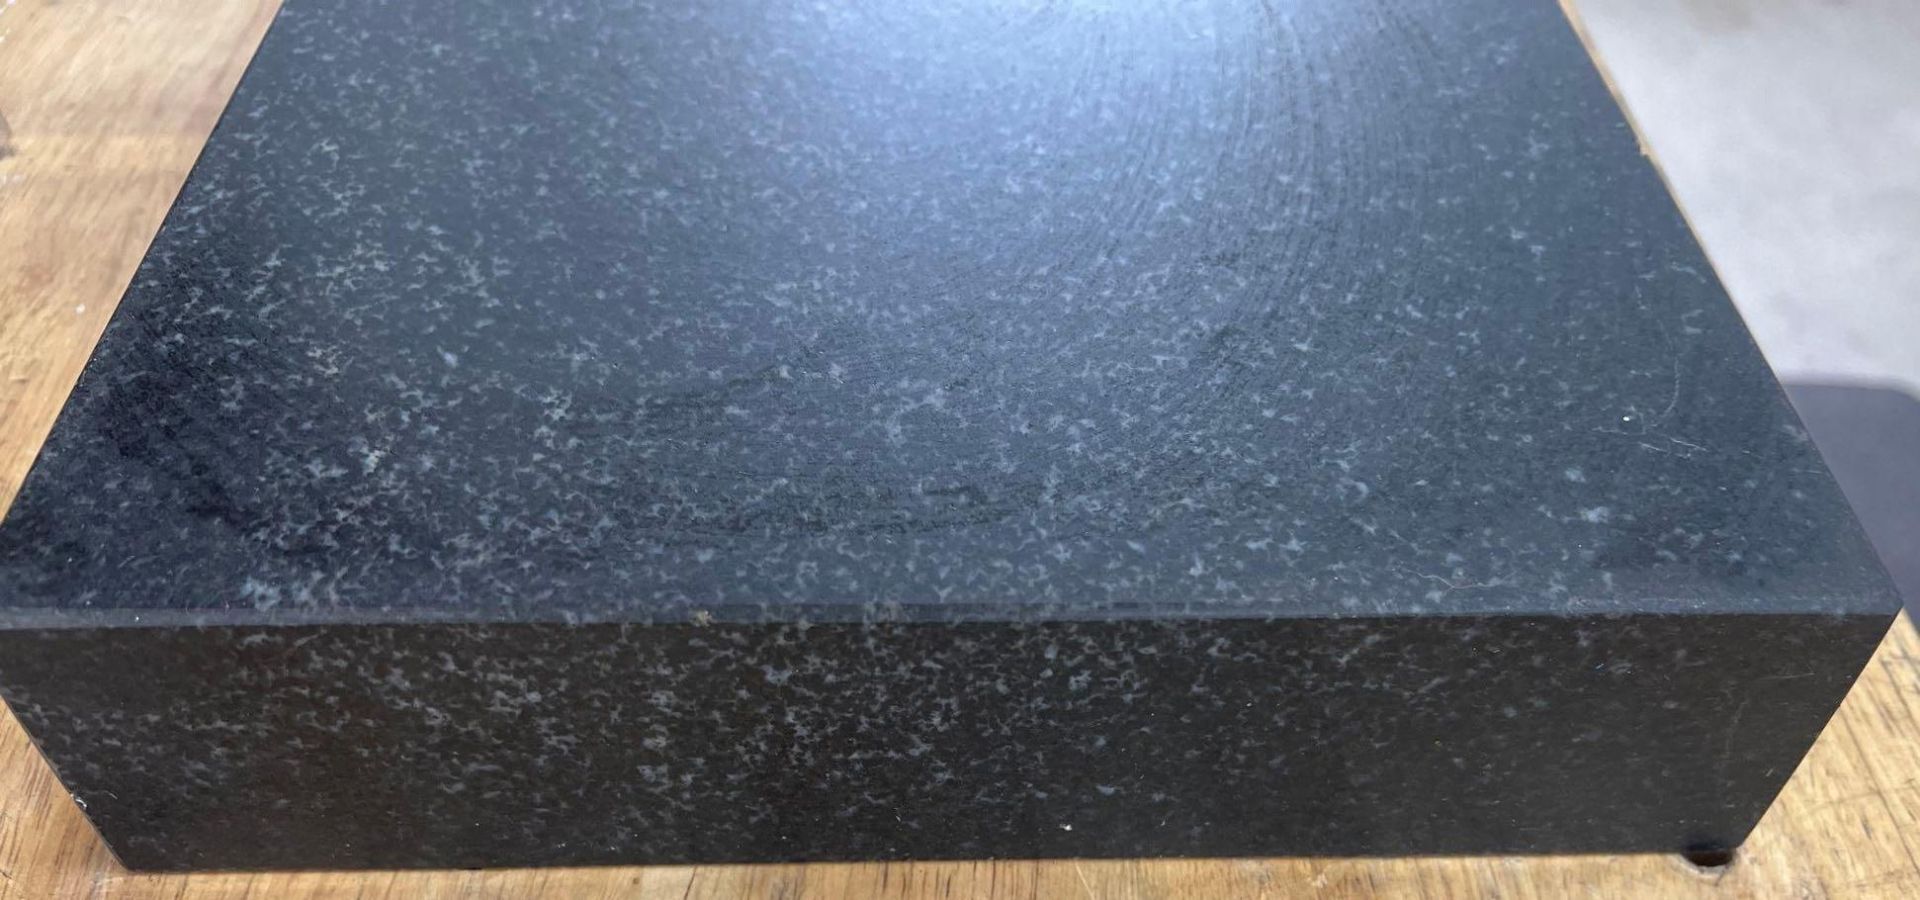 12"x9"x2" Granite Inspection Plate - Image 4 of 7